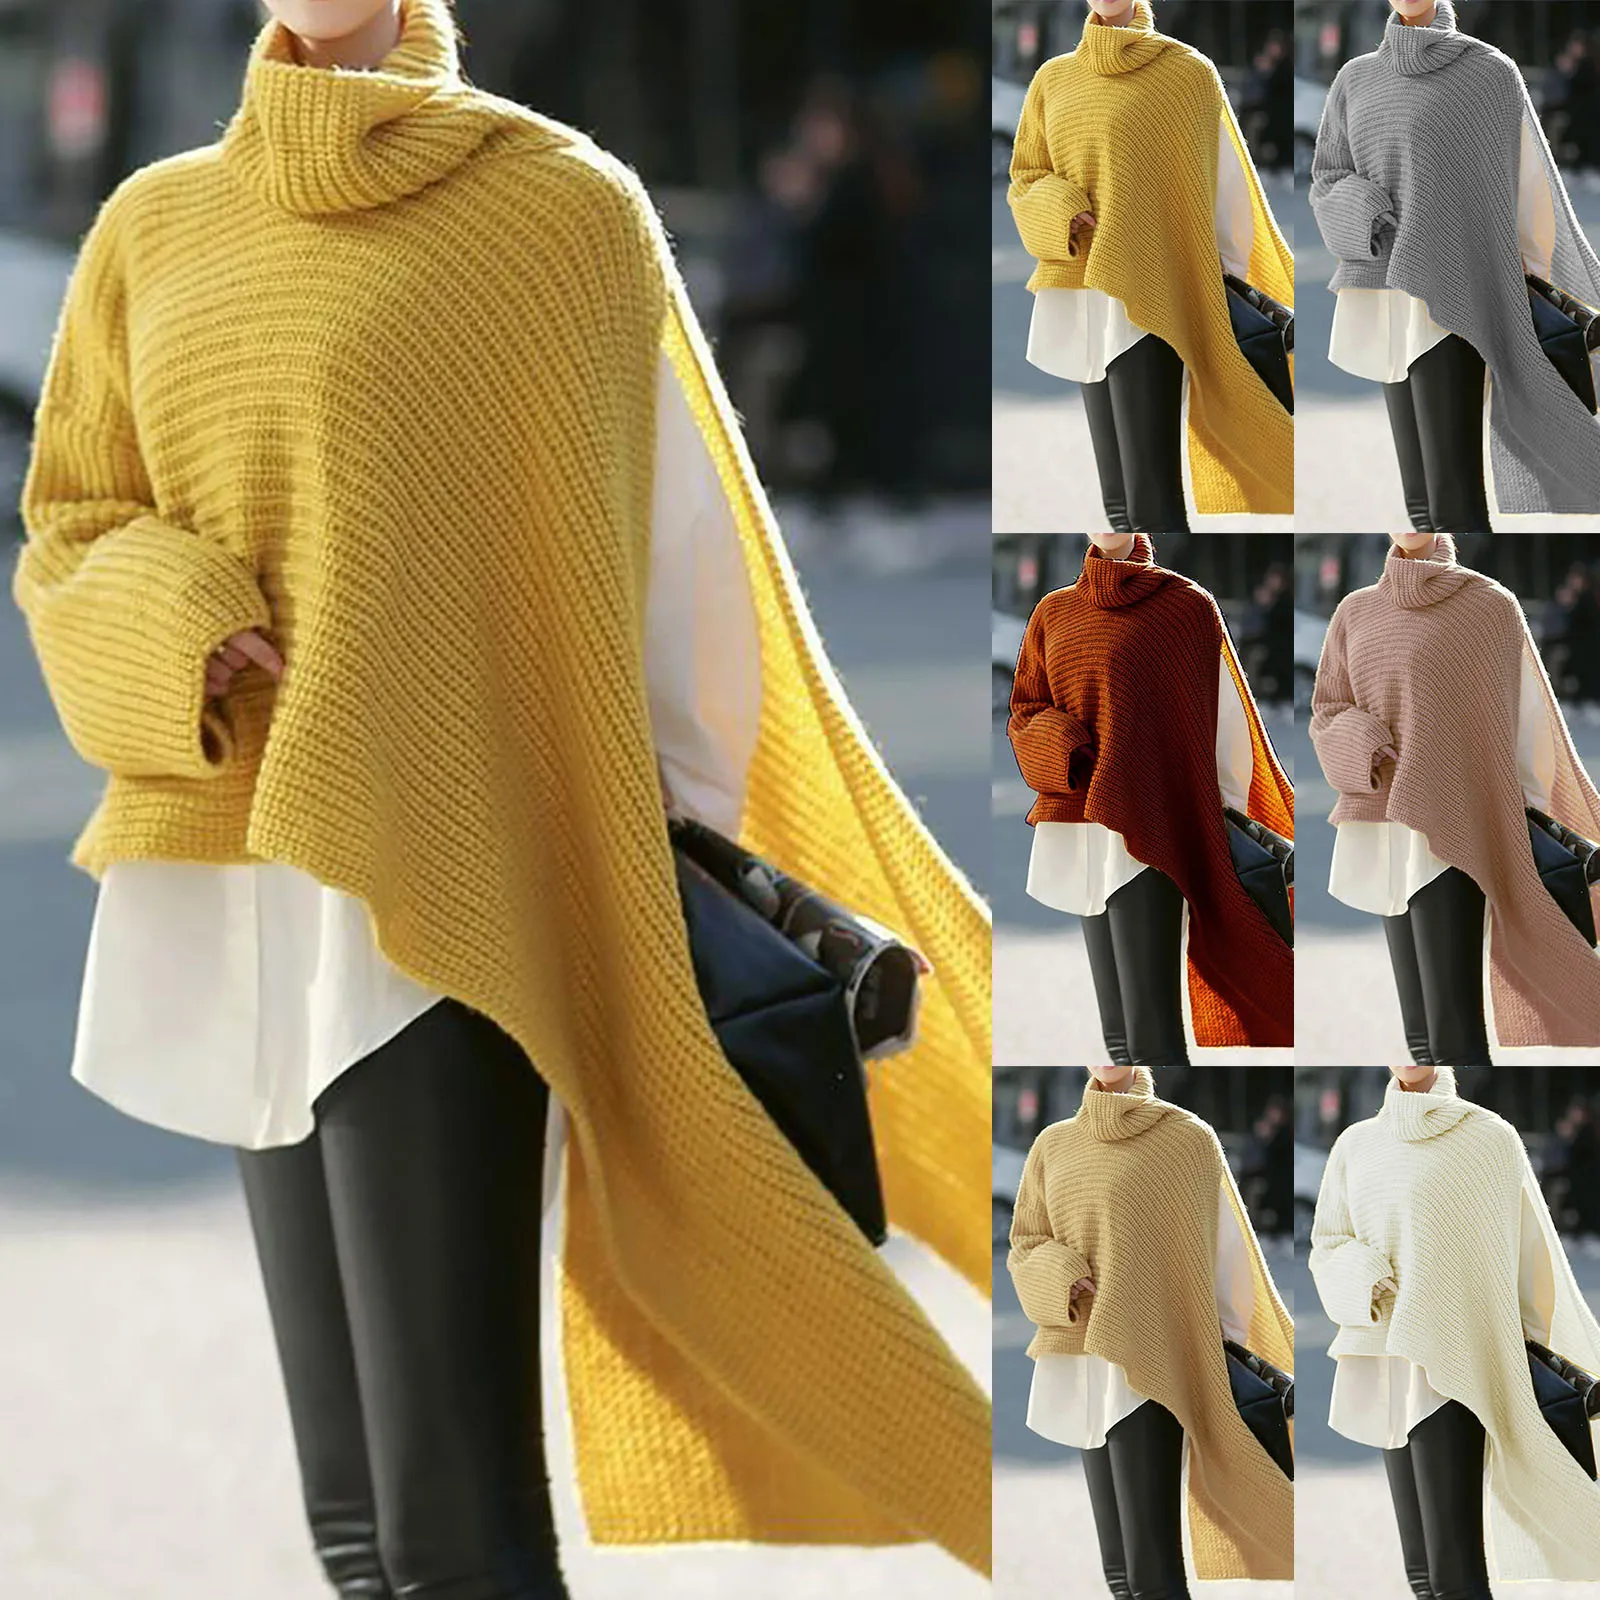 

Women Winter Knitted Turtleneck Sweater Poncho Cape Solid Color Crochet Fringed Shawl Wrap Oversized Pullover Cloak Sweater Tops